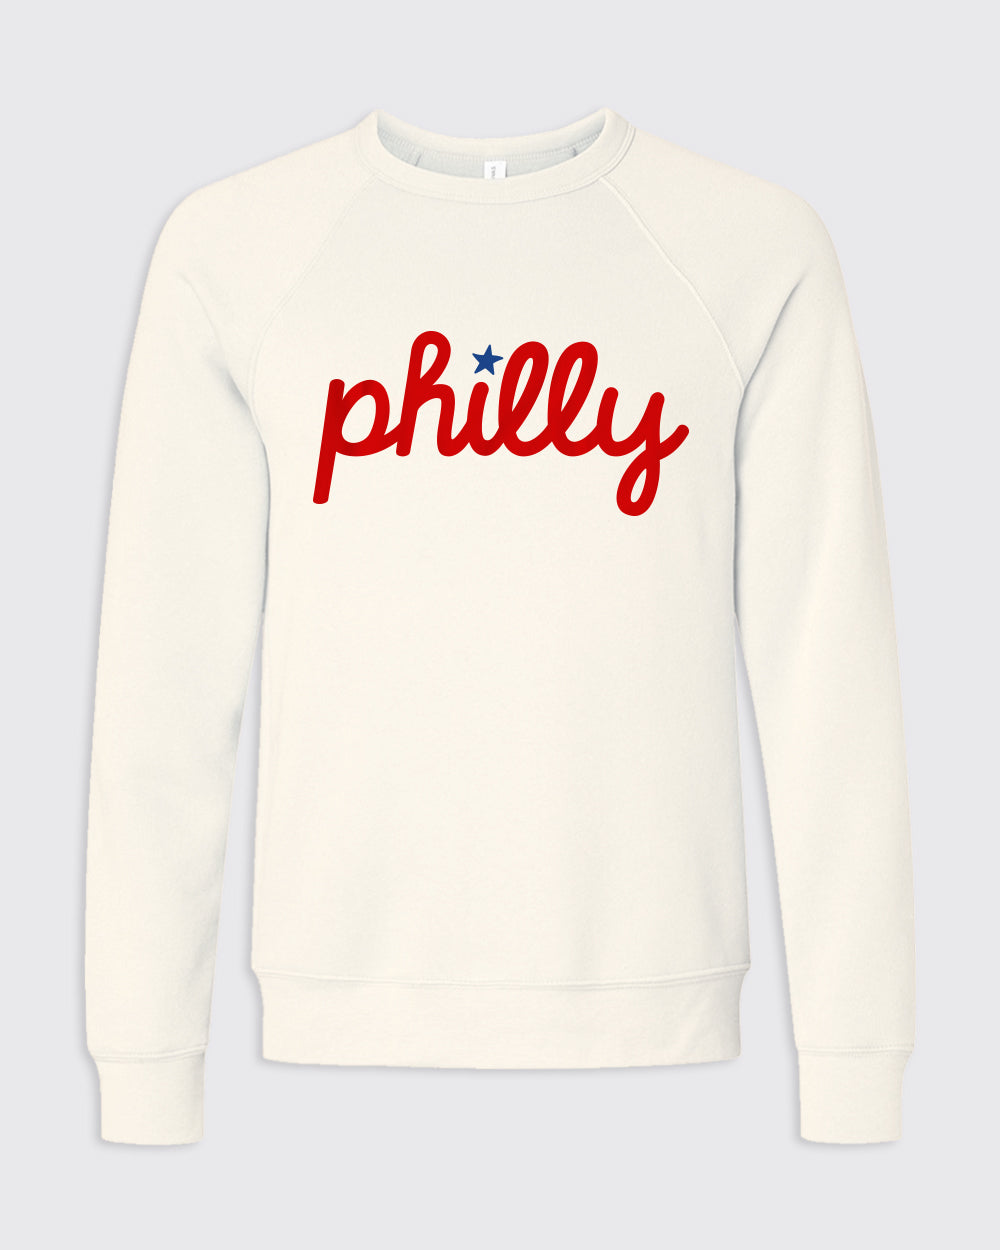 Show pride for your team and get your Phillies gear here! Last chance to  shop select Phillies apparel for 50% off 😃 Store hours 12pm-7pm…